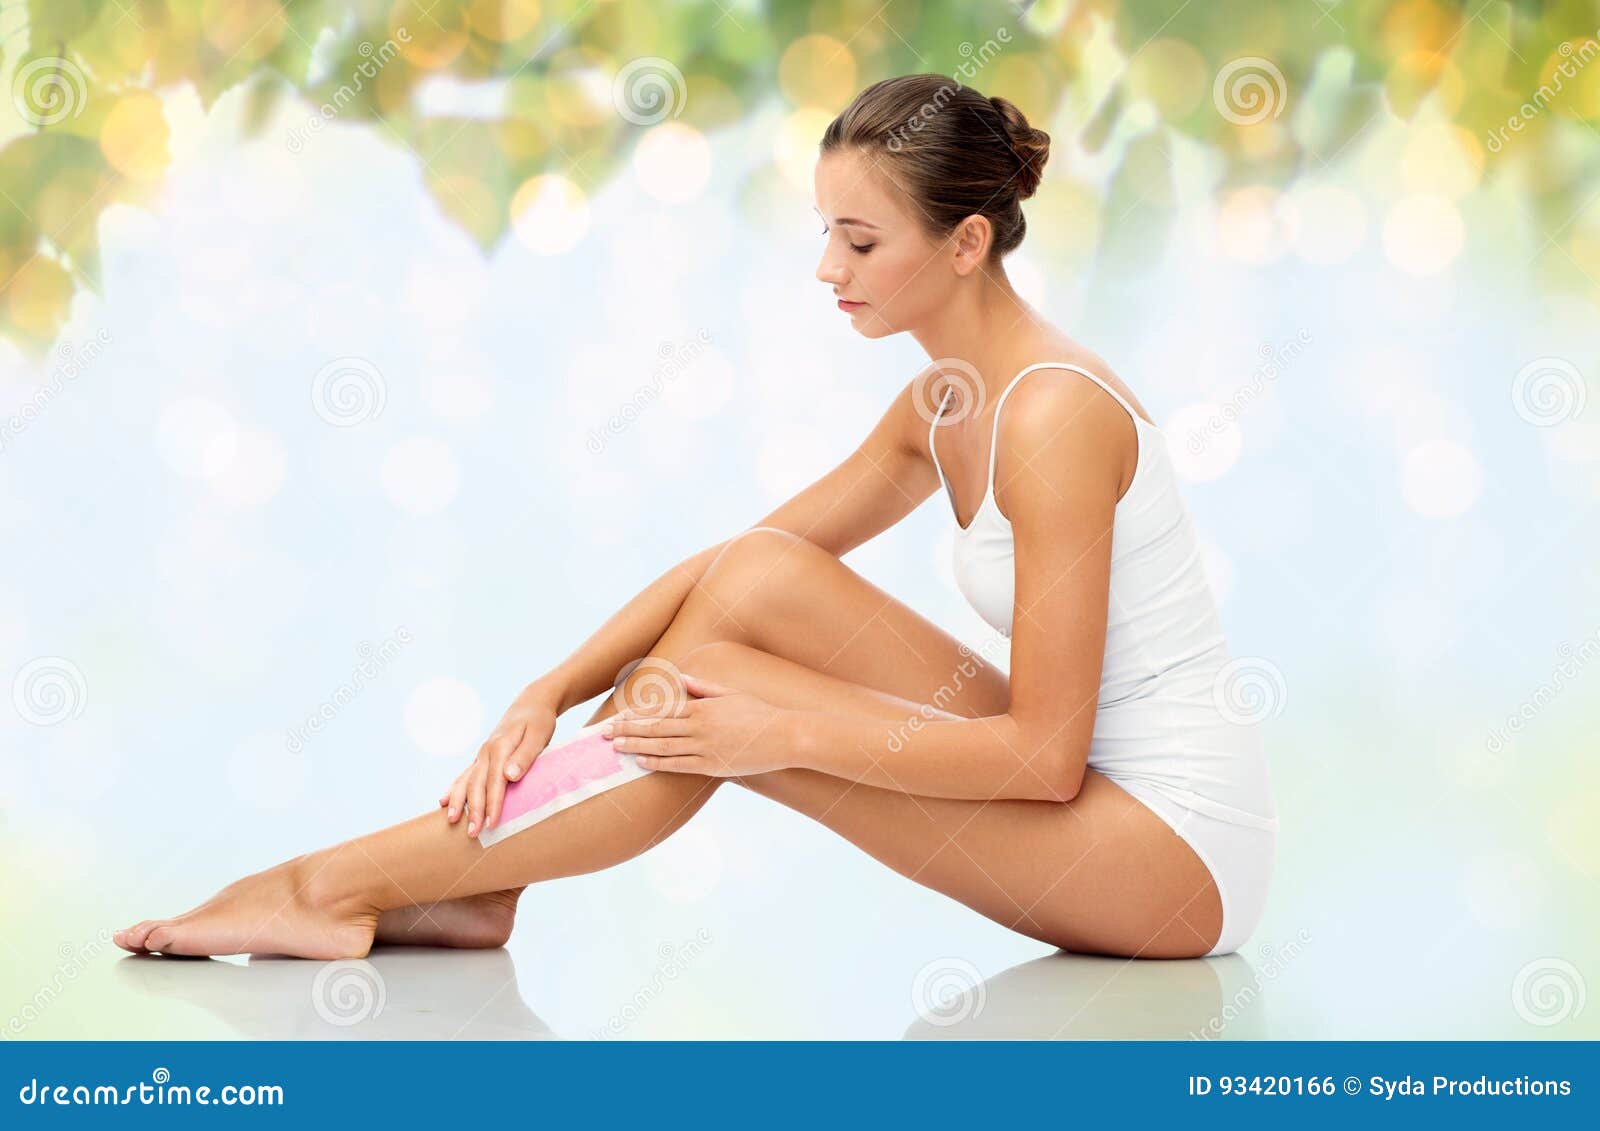 Woman Removing Leg Hair with Depilatory Wax Strip Stock Photo - Image of  people, background: 93420166